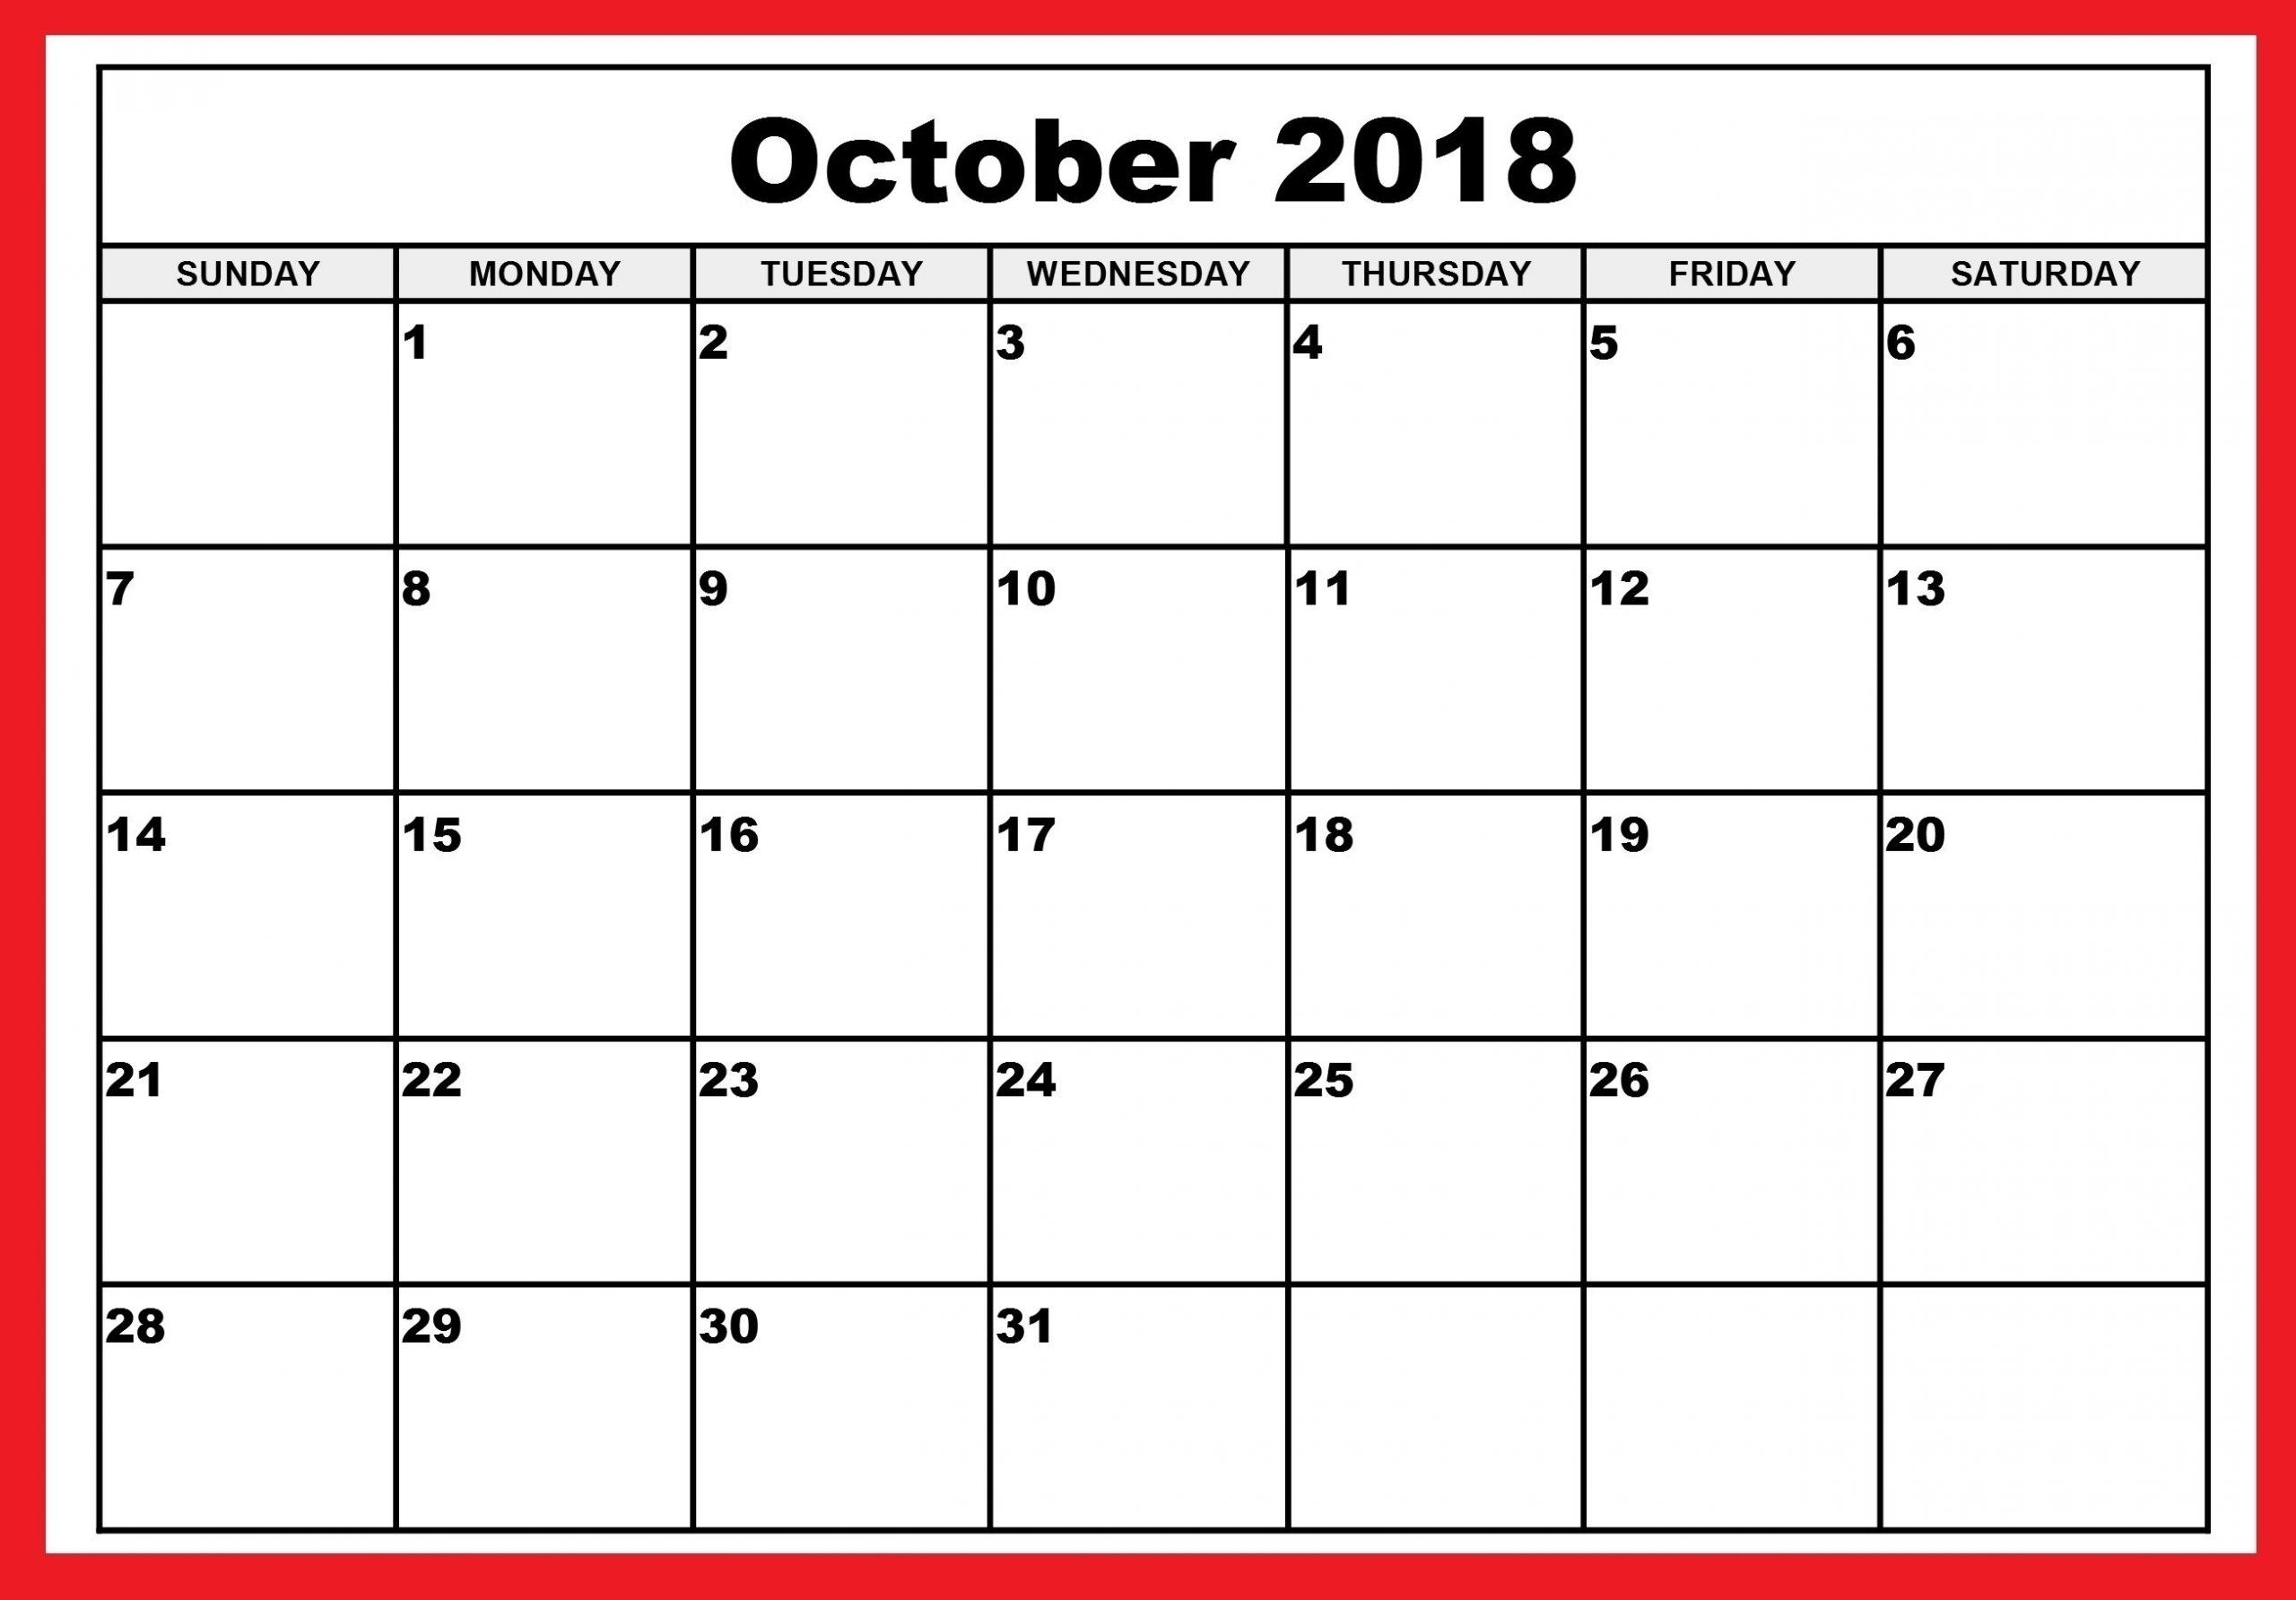 October Blank Calendar Monday To Friday Only | Template Calendar in October Blank Calendar Monday To Friday Only